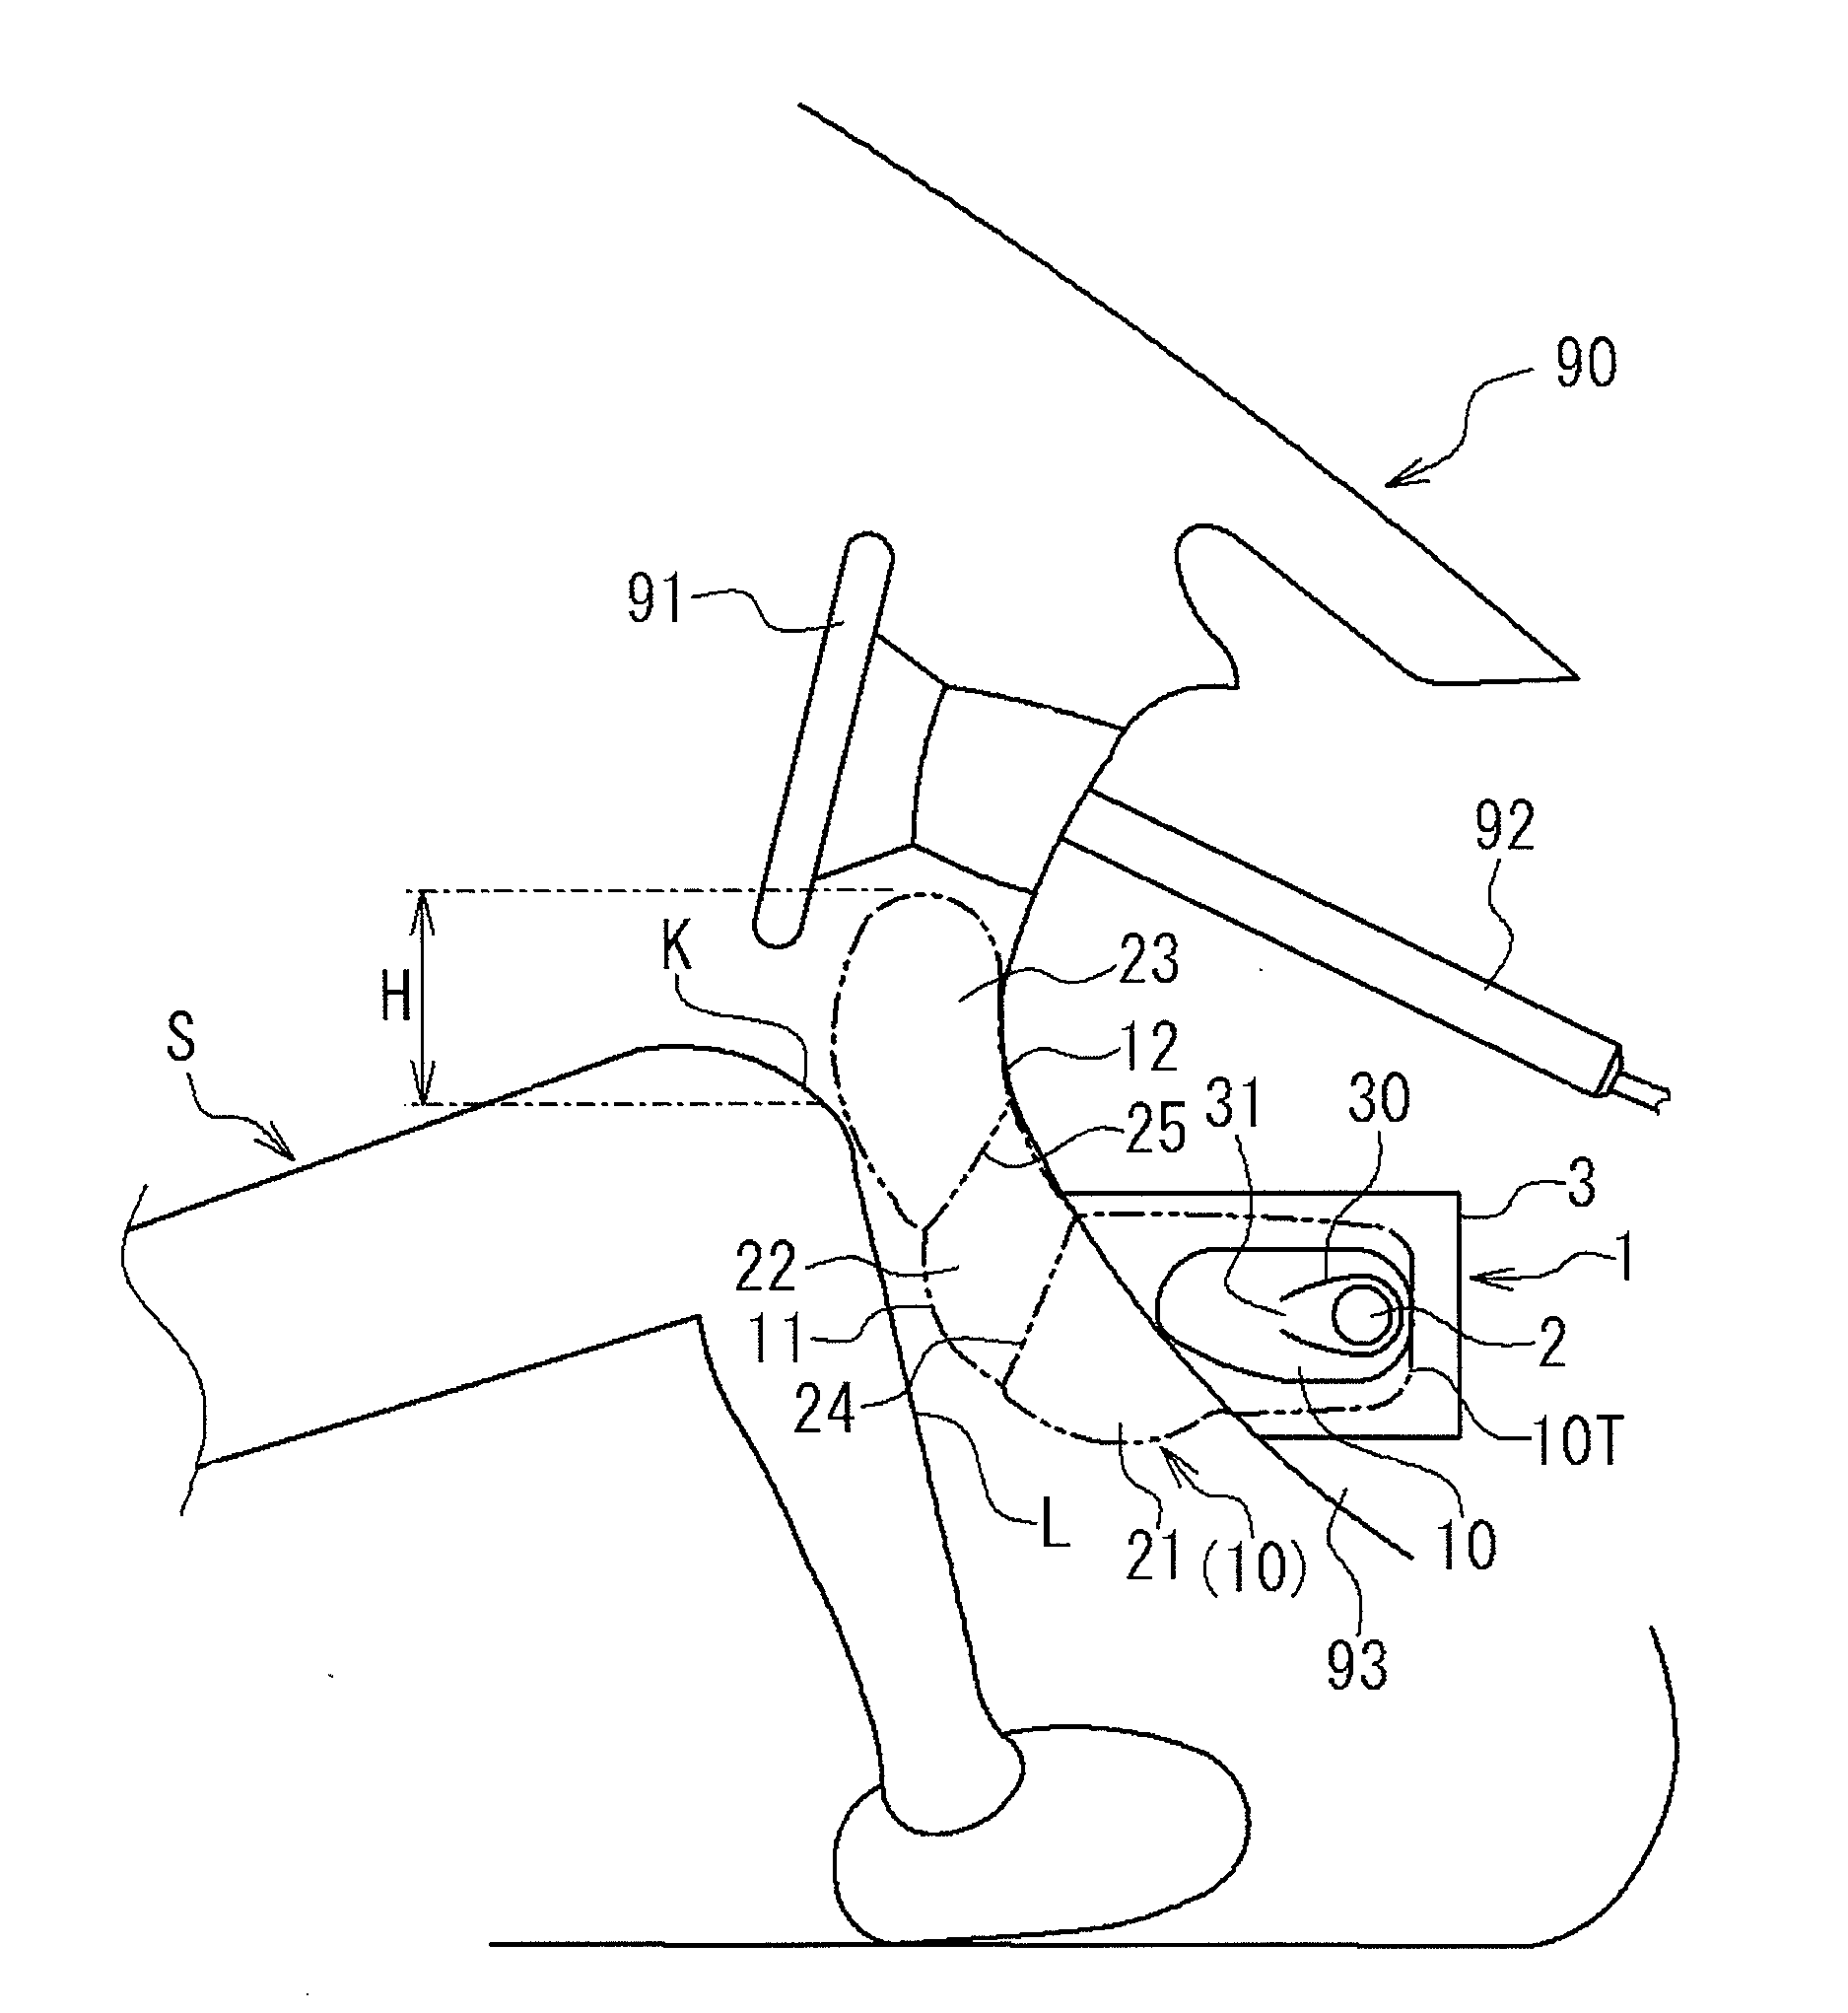 Knee-protecting airbag device